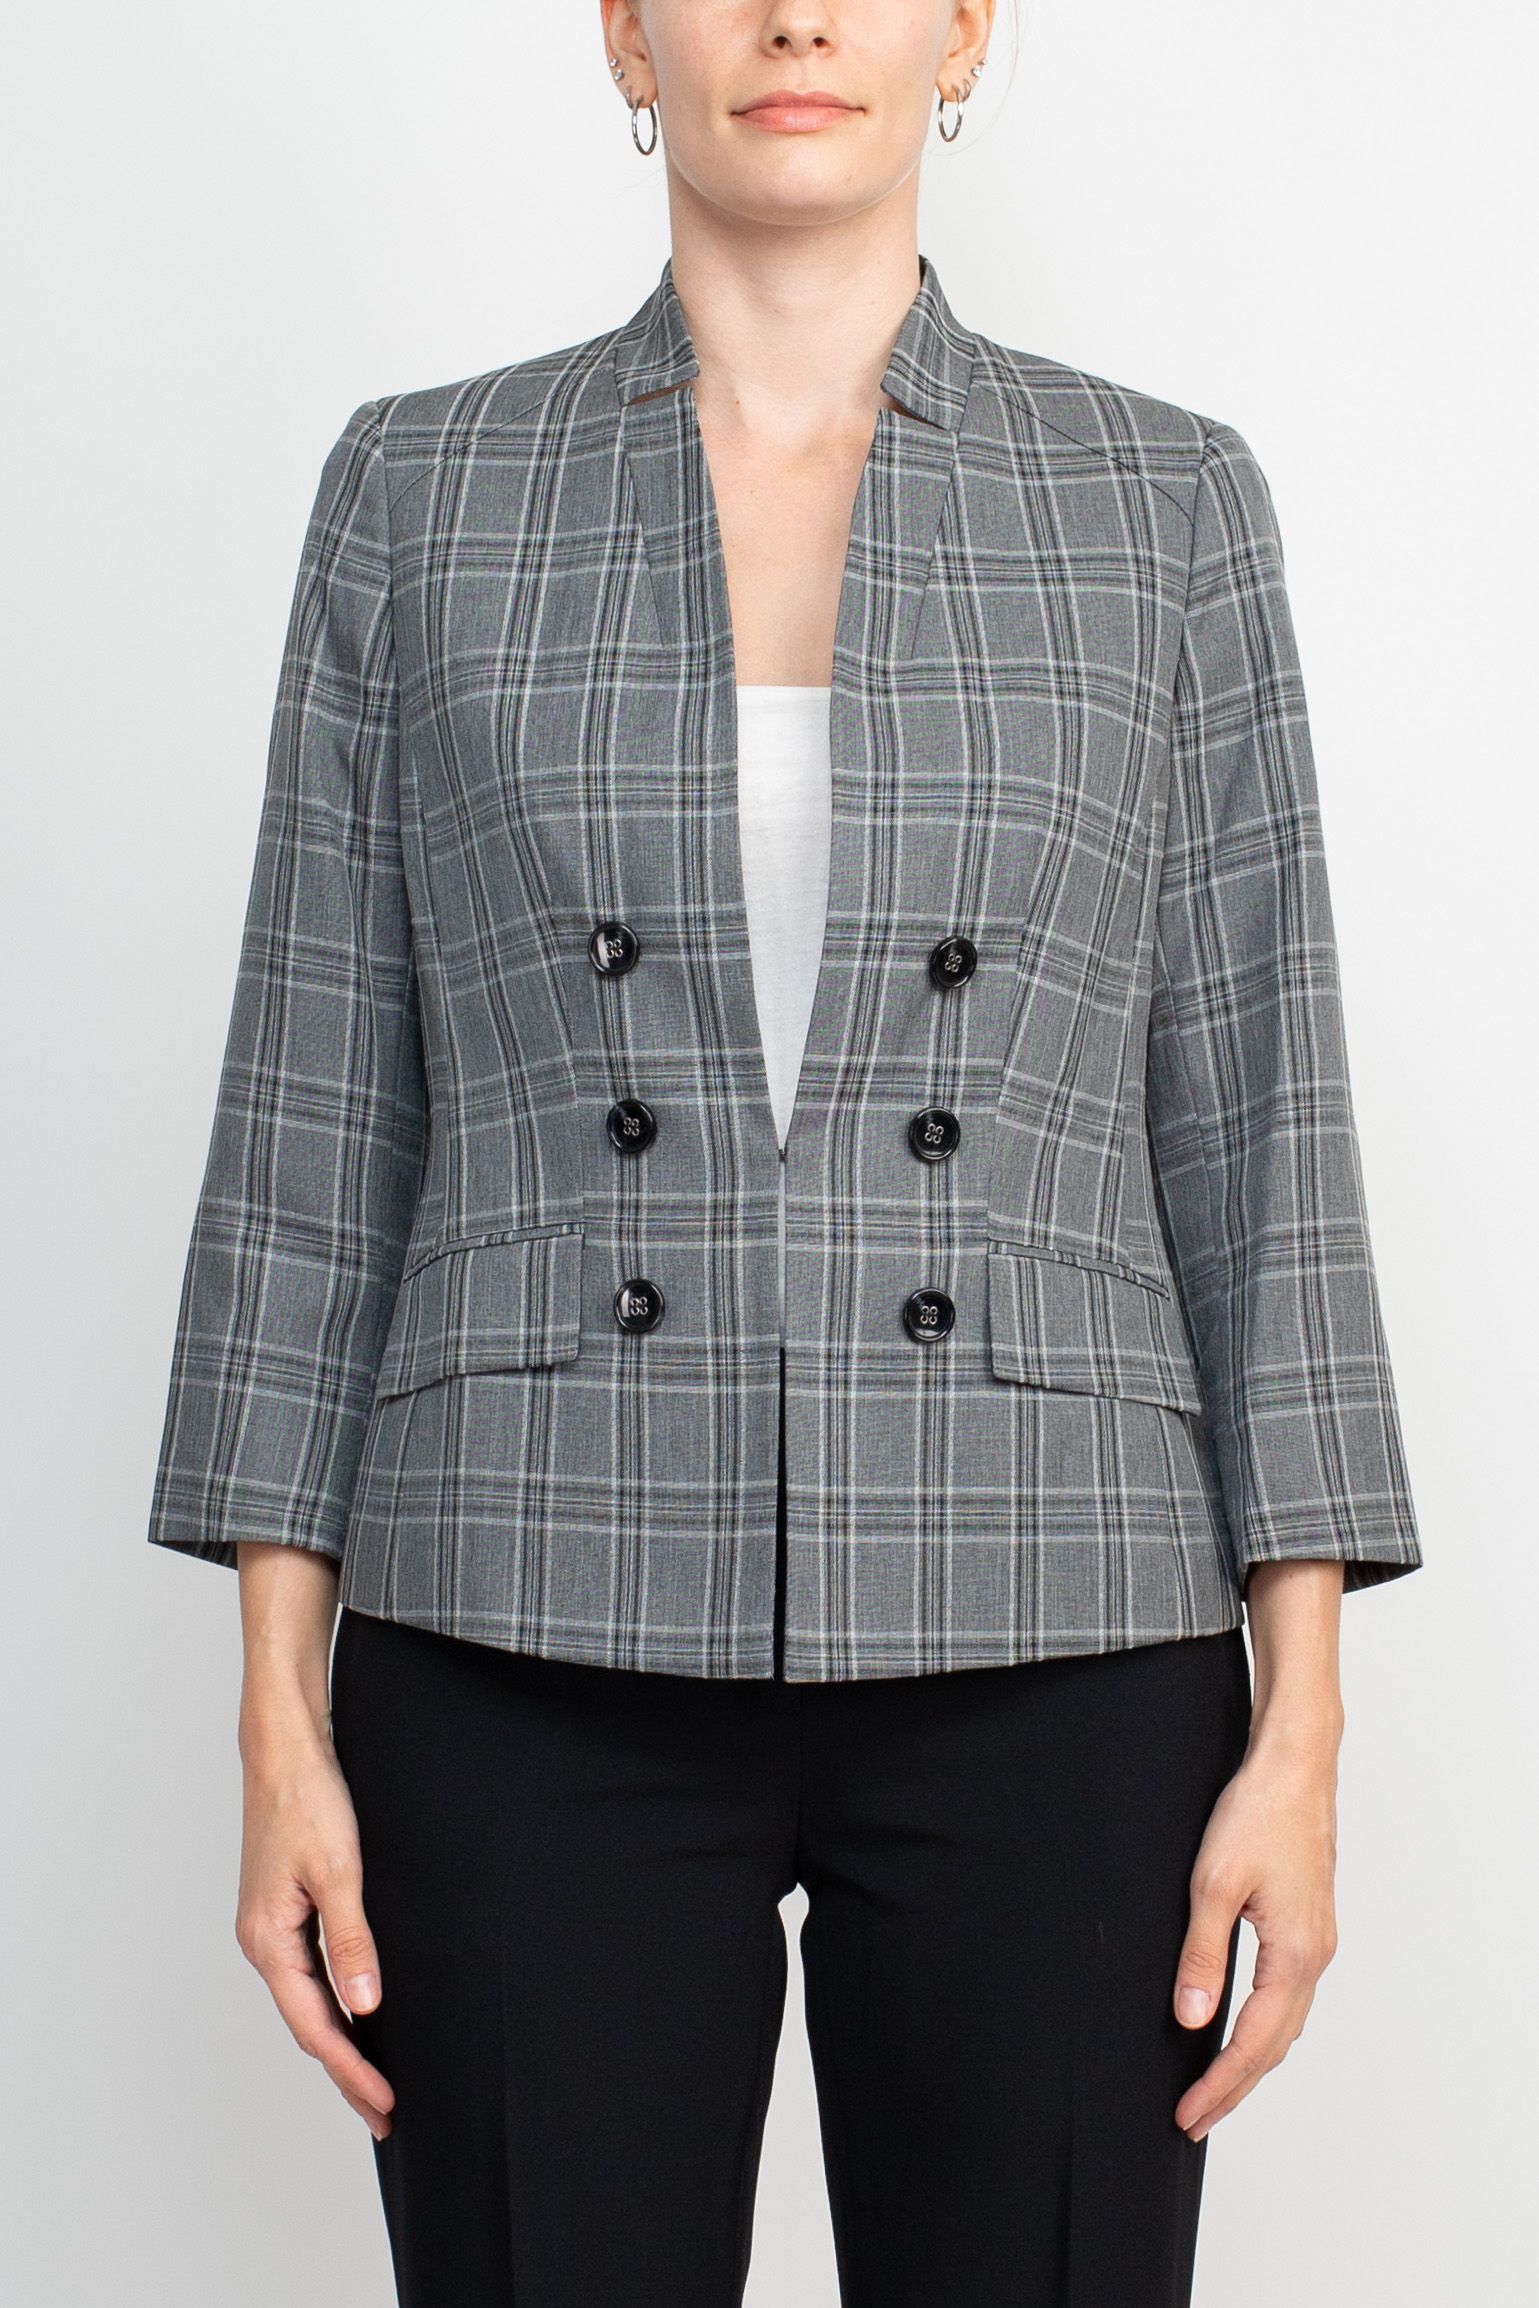 Le Suit Windowpane Pattern 6 Button Hook Closure Jacket with